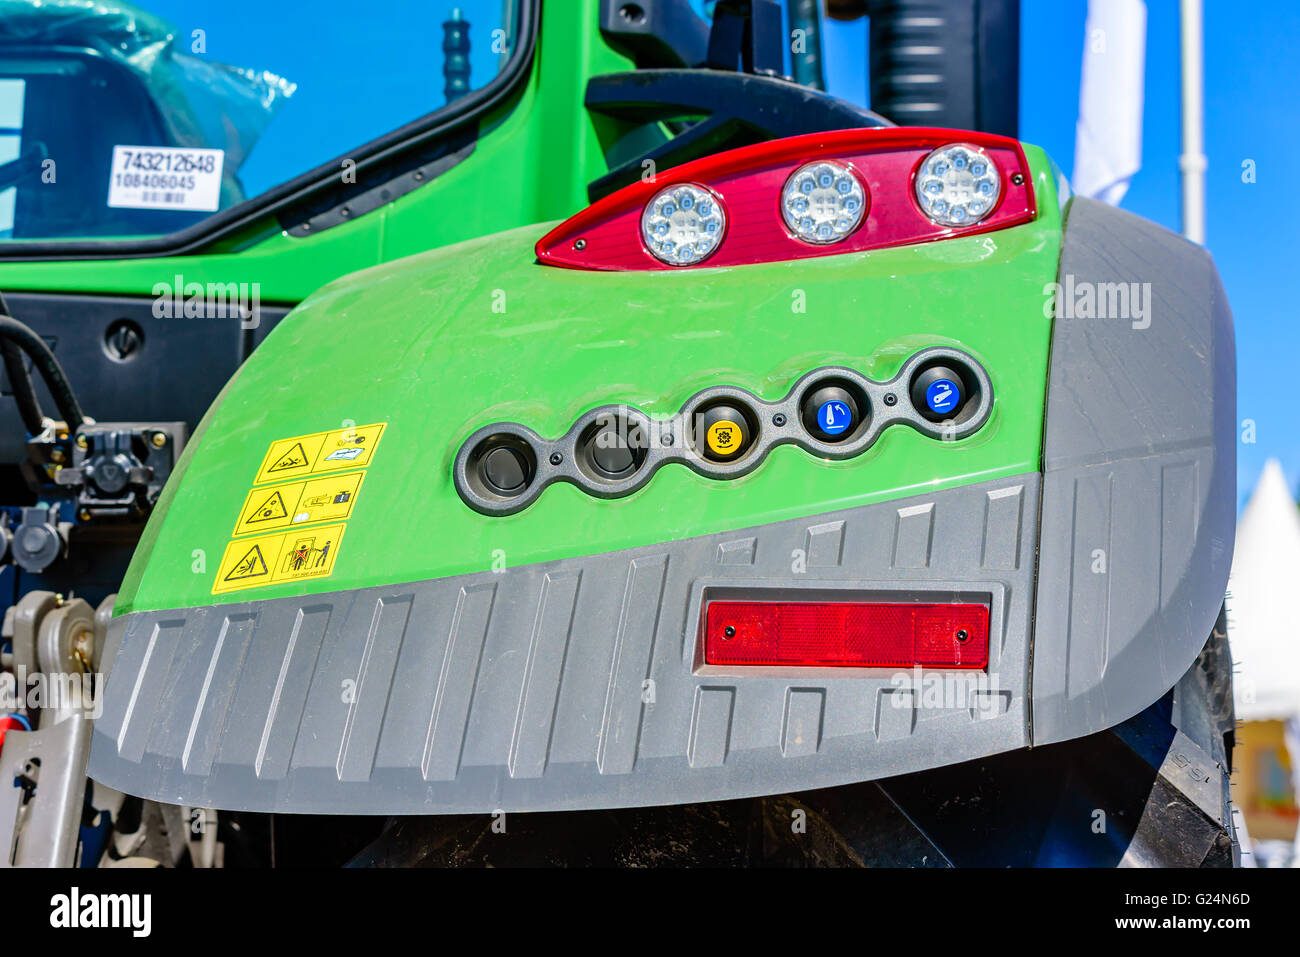 Emmaboda, Sweden - May 13, 2016: Forest and tractor (Skog och traktor) fair. Detail from the wheelhouse control panel of a green Stock Photo